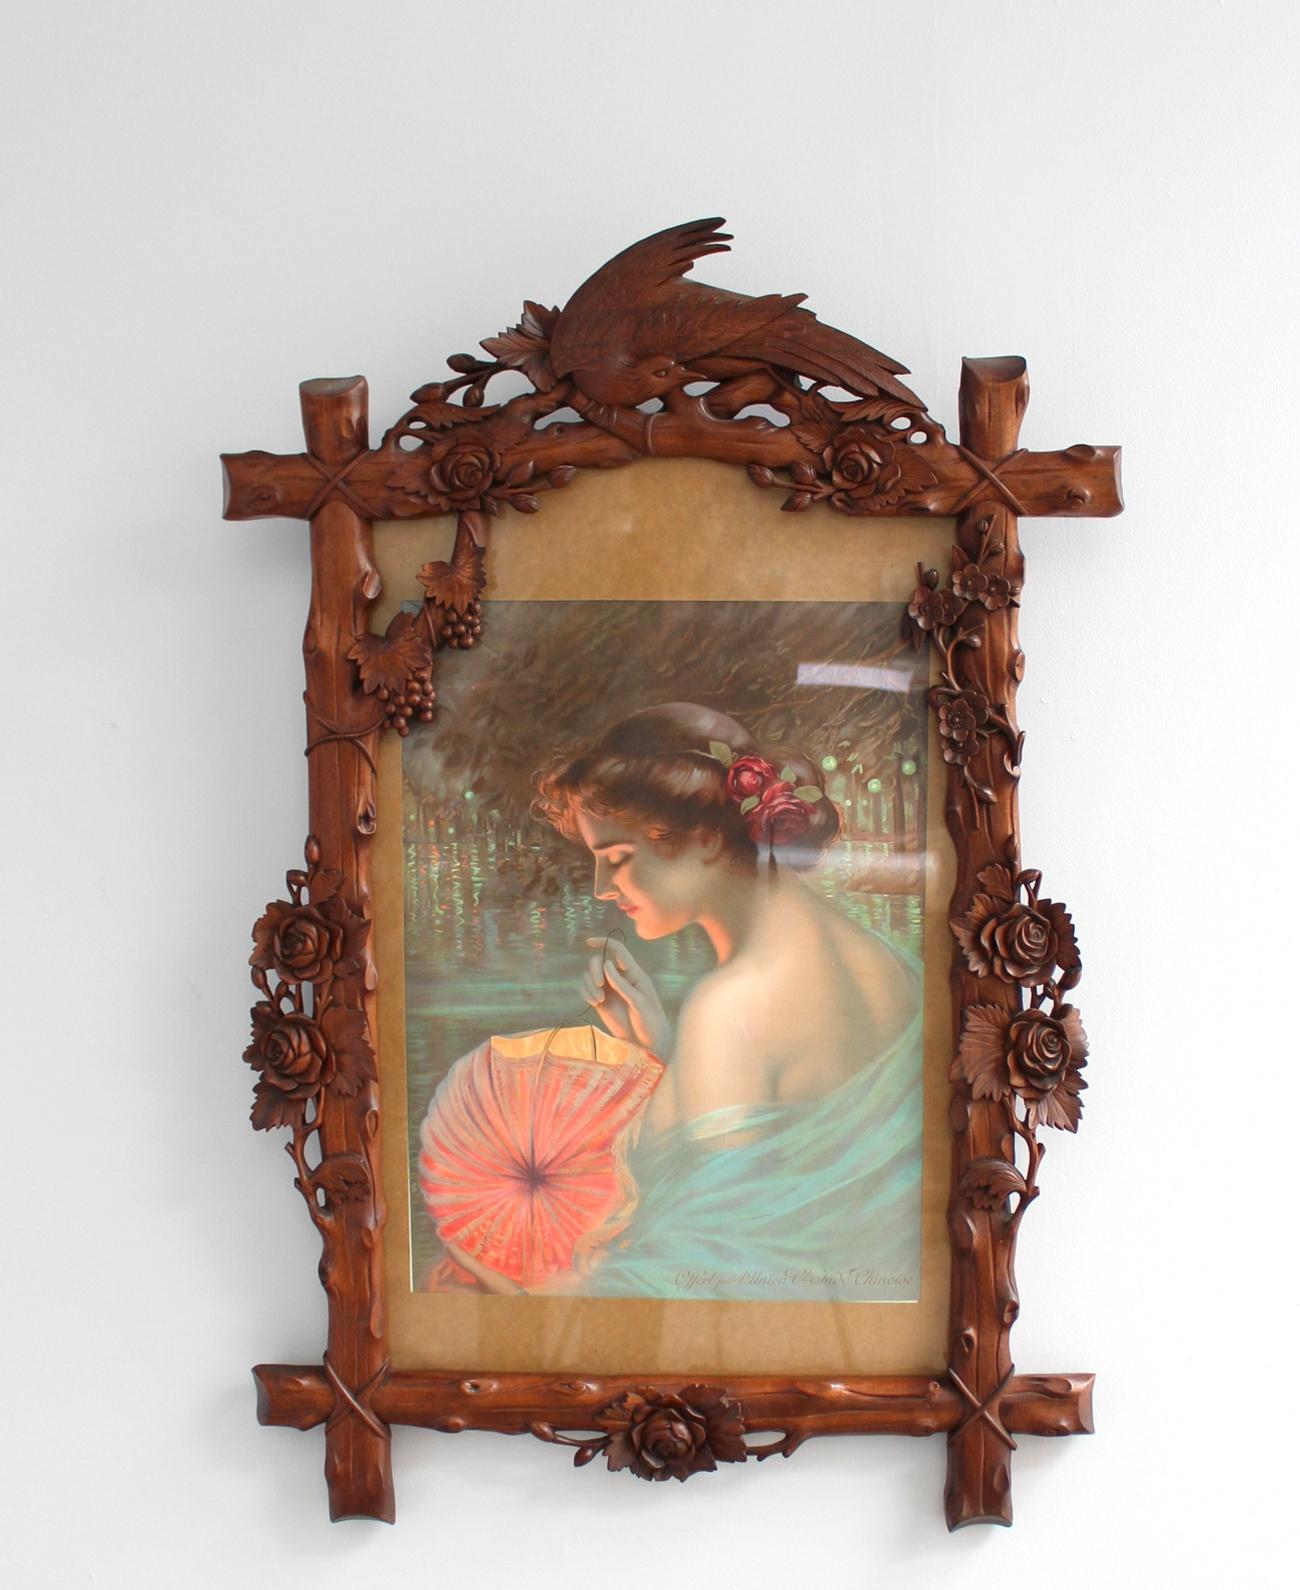 A fine French Art Nouveau hand carved and stained wood frame with flowers, grapes and bird, framing an original poster 